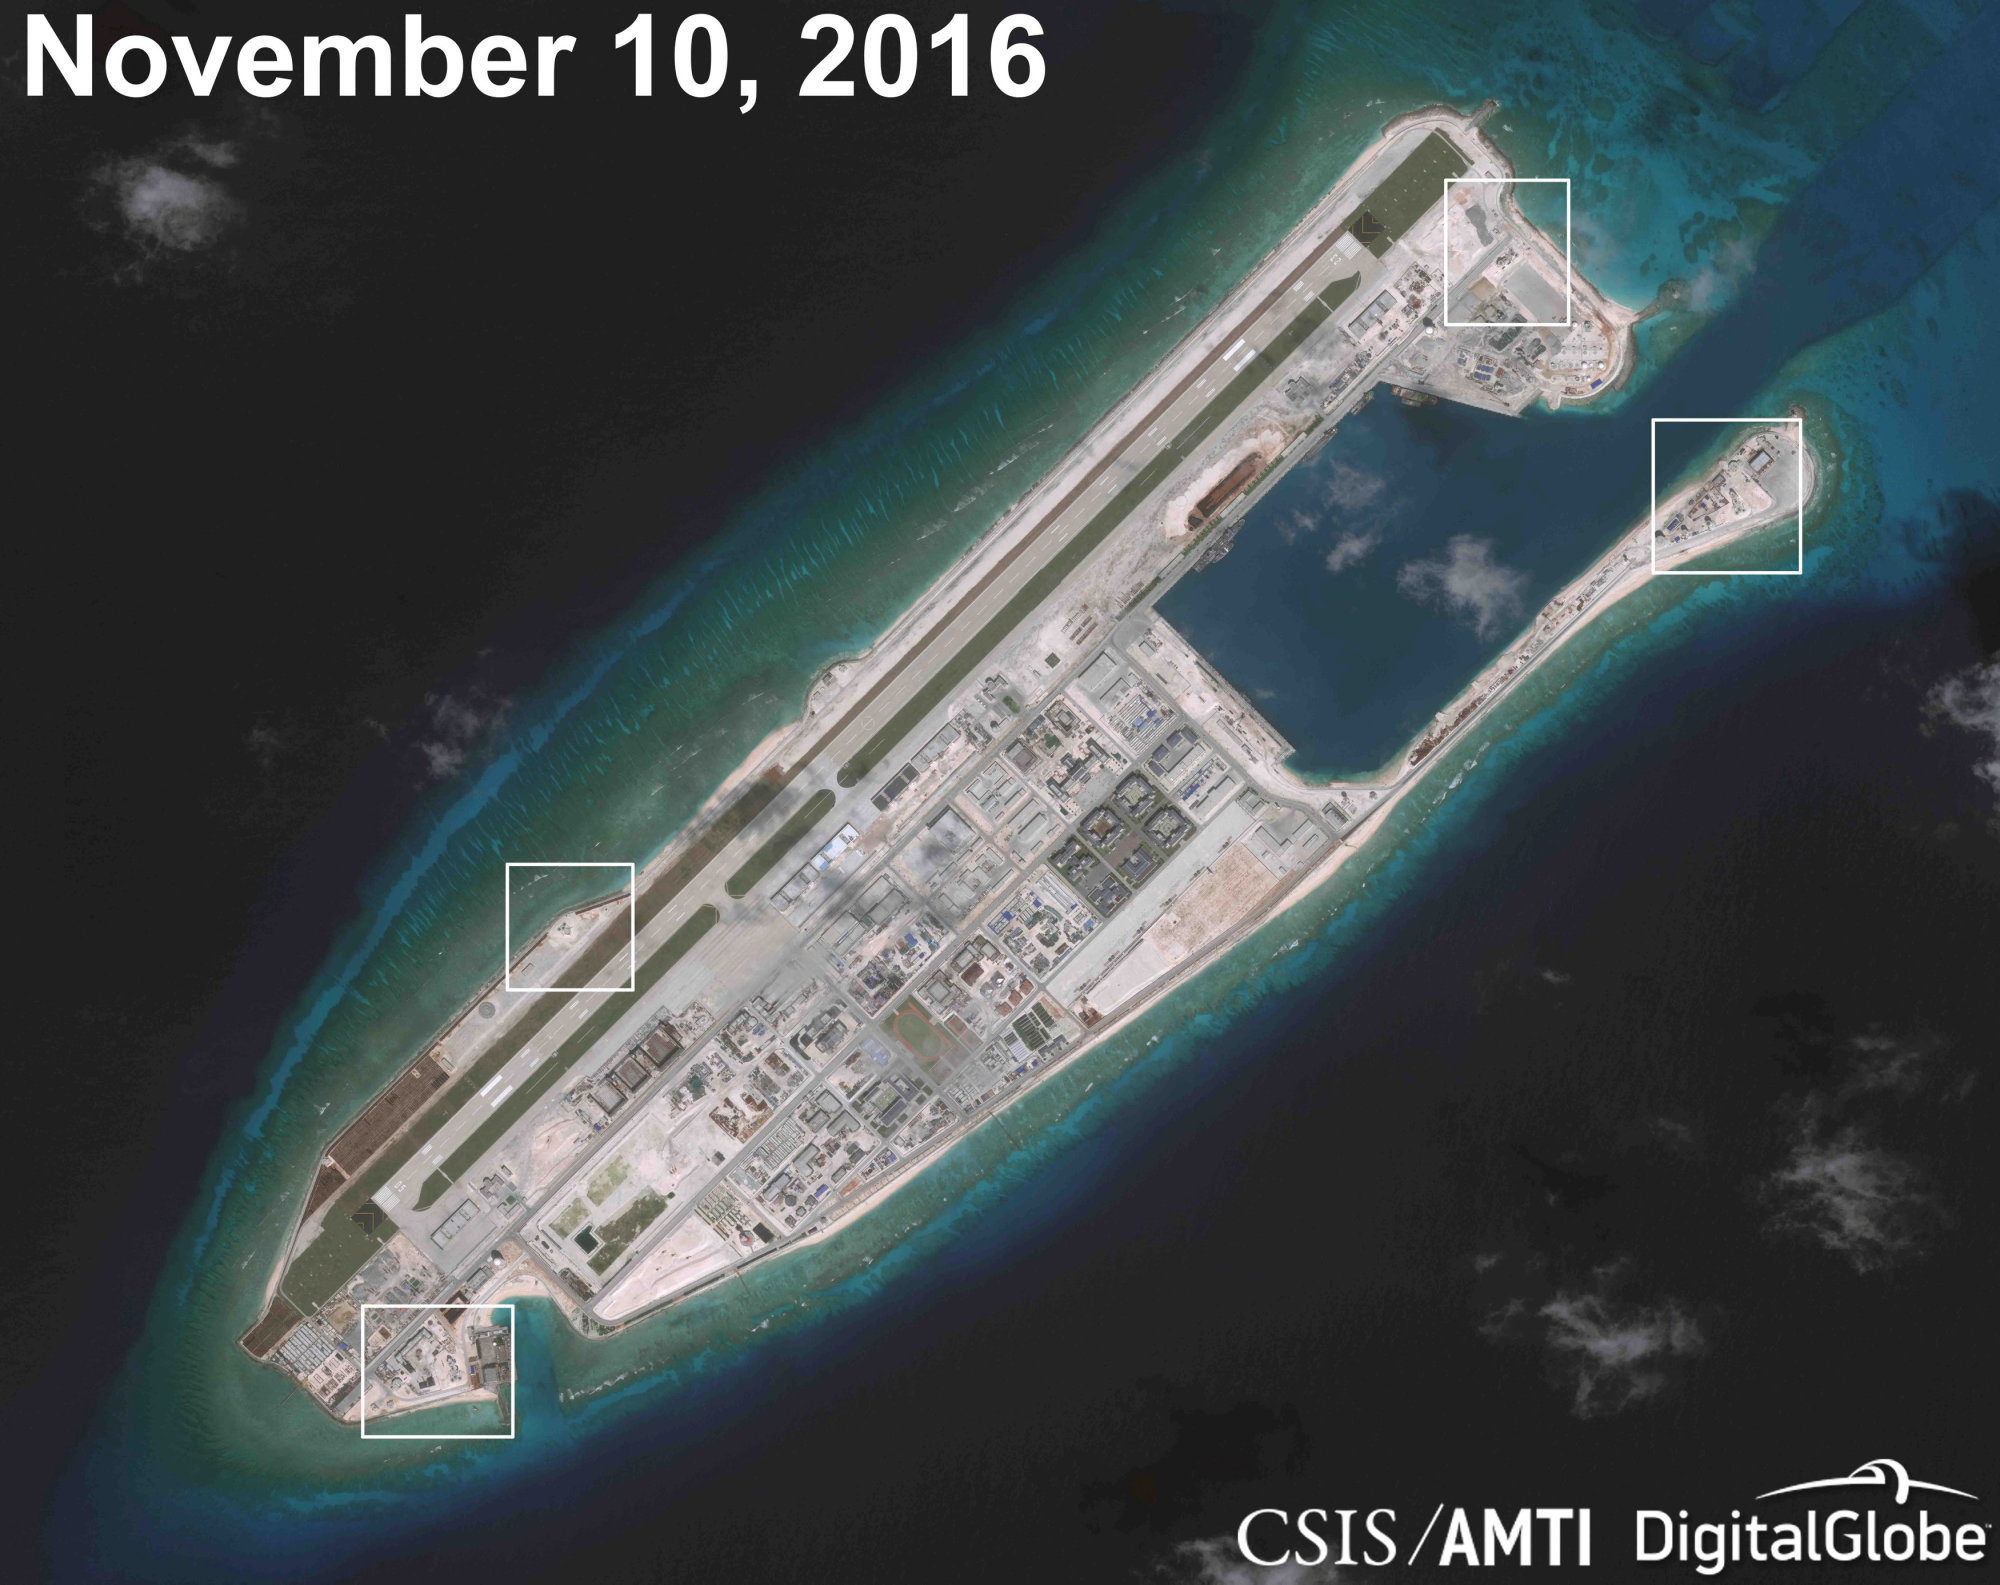 A satellite image shows what appears to be anti-aircraft guns and what are likely to be close-in weapons systems on the artificial island at Fiery Cross Reef in the South China Sea in this image released Dec. 13. | CSIS ASIA MARITIME TRANSPARENCY INITIATIVE / DIGITALGLOBE / VIA REUTERS